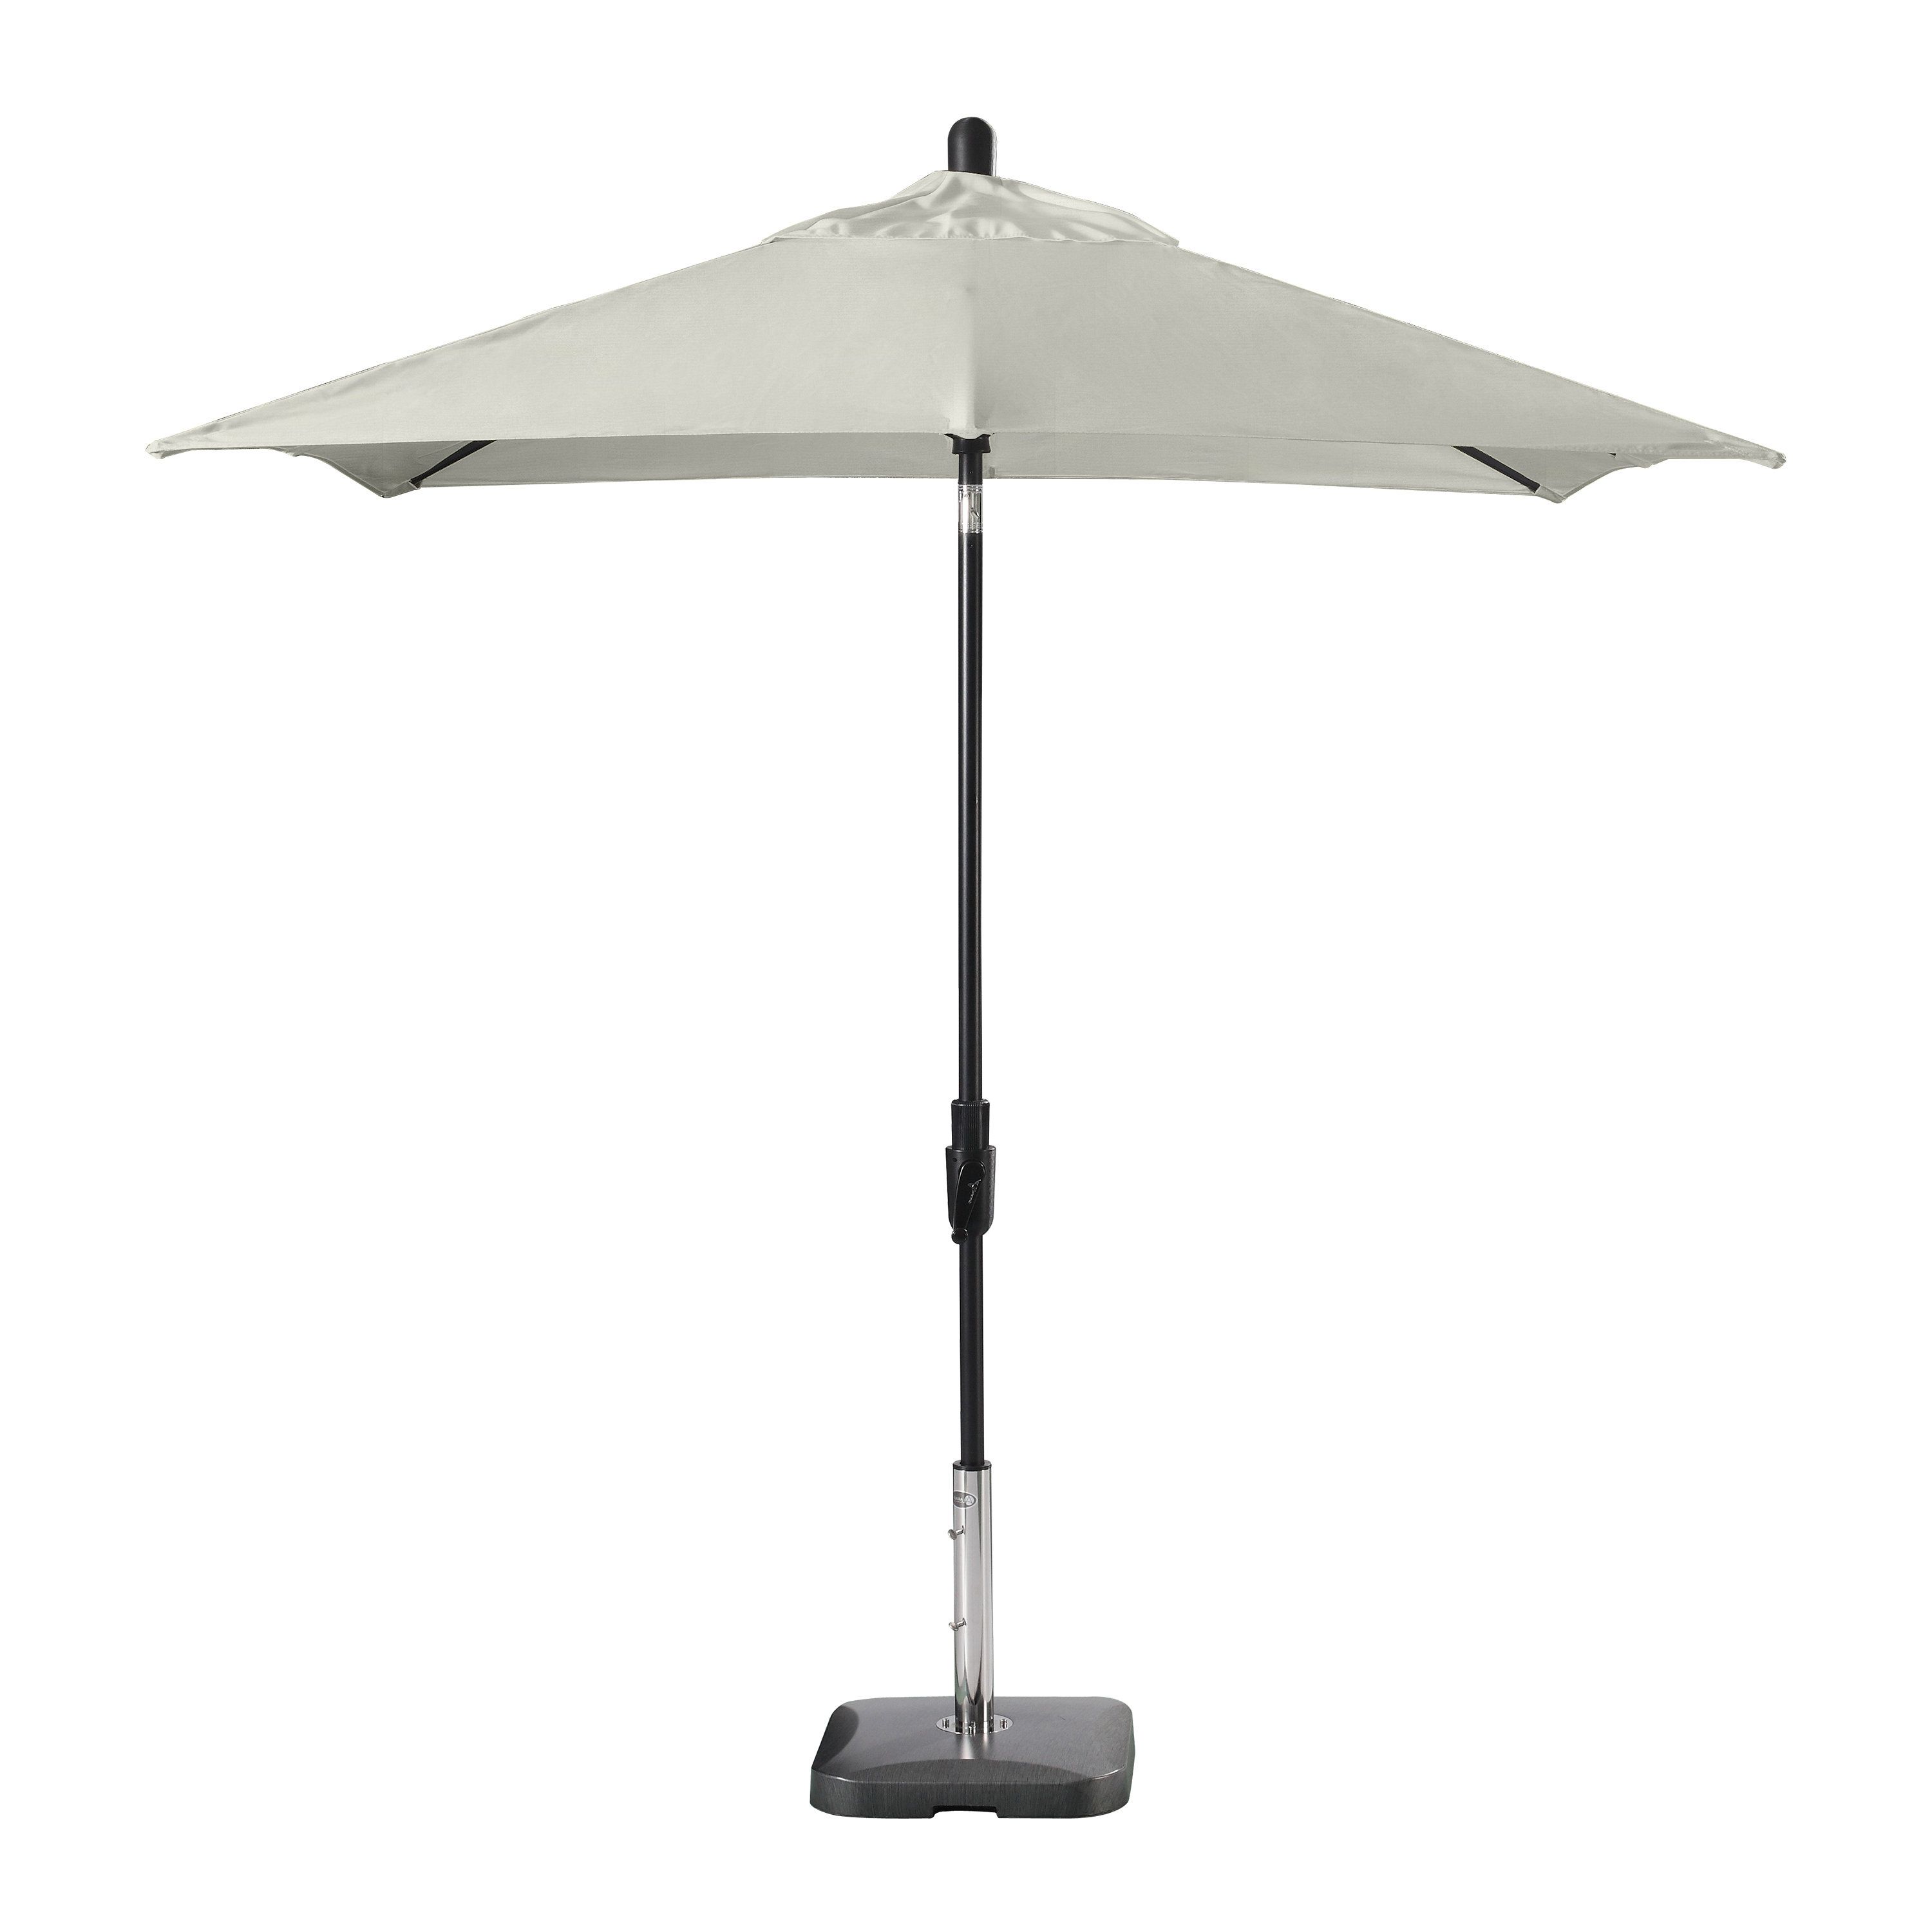 Wiebe Auto Tilt 7.5' Square Market Sunbrella Umbrella Intended For Most Recently Released Caravelle Market Sunbrella Umbrellas (Photo 4 of 20)